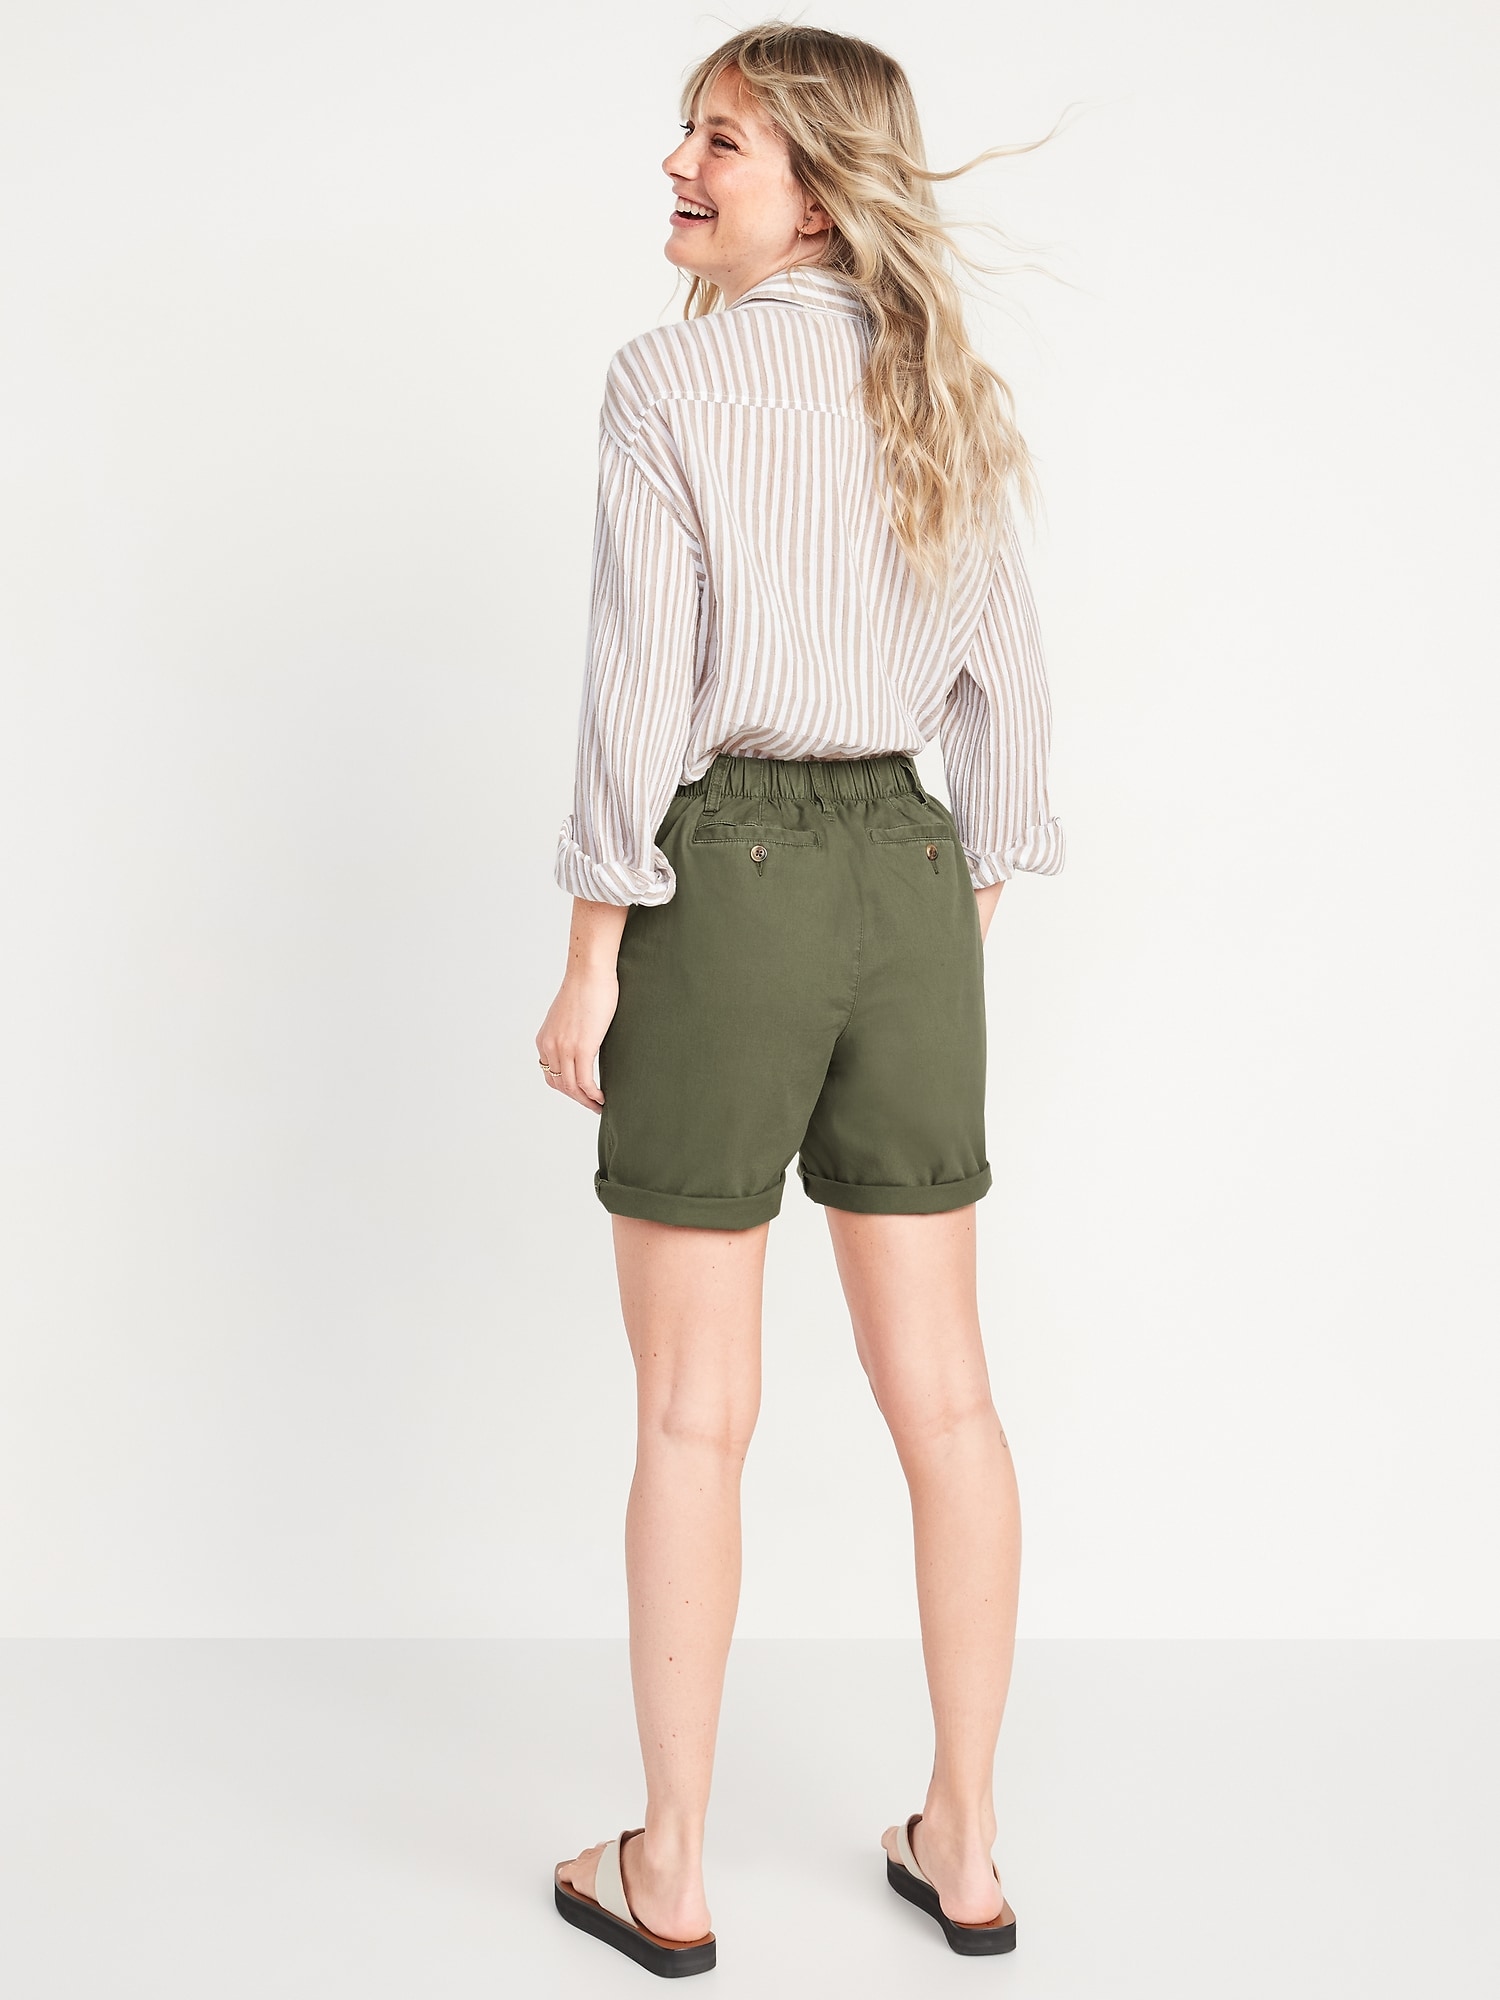 High-Waisted OGC Pull-On Chino Shorts for Women -- 7-inch inseam